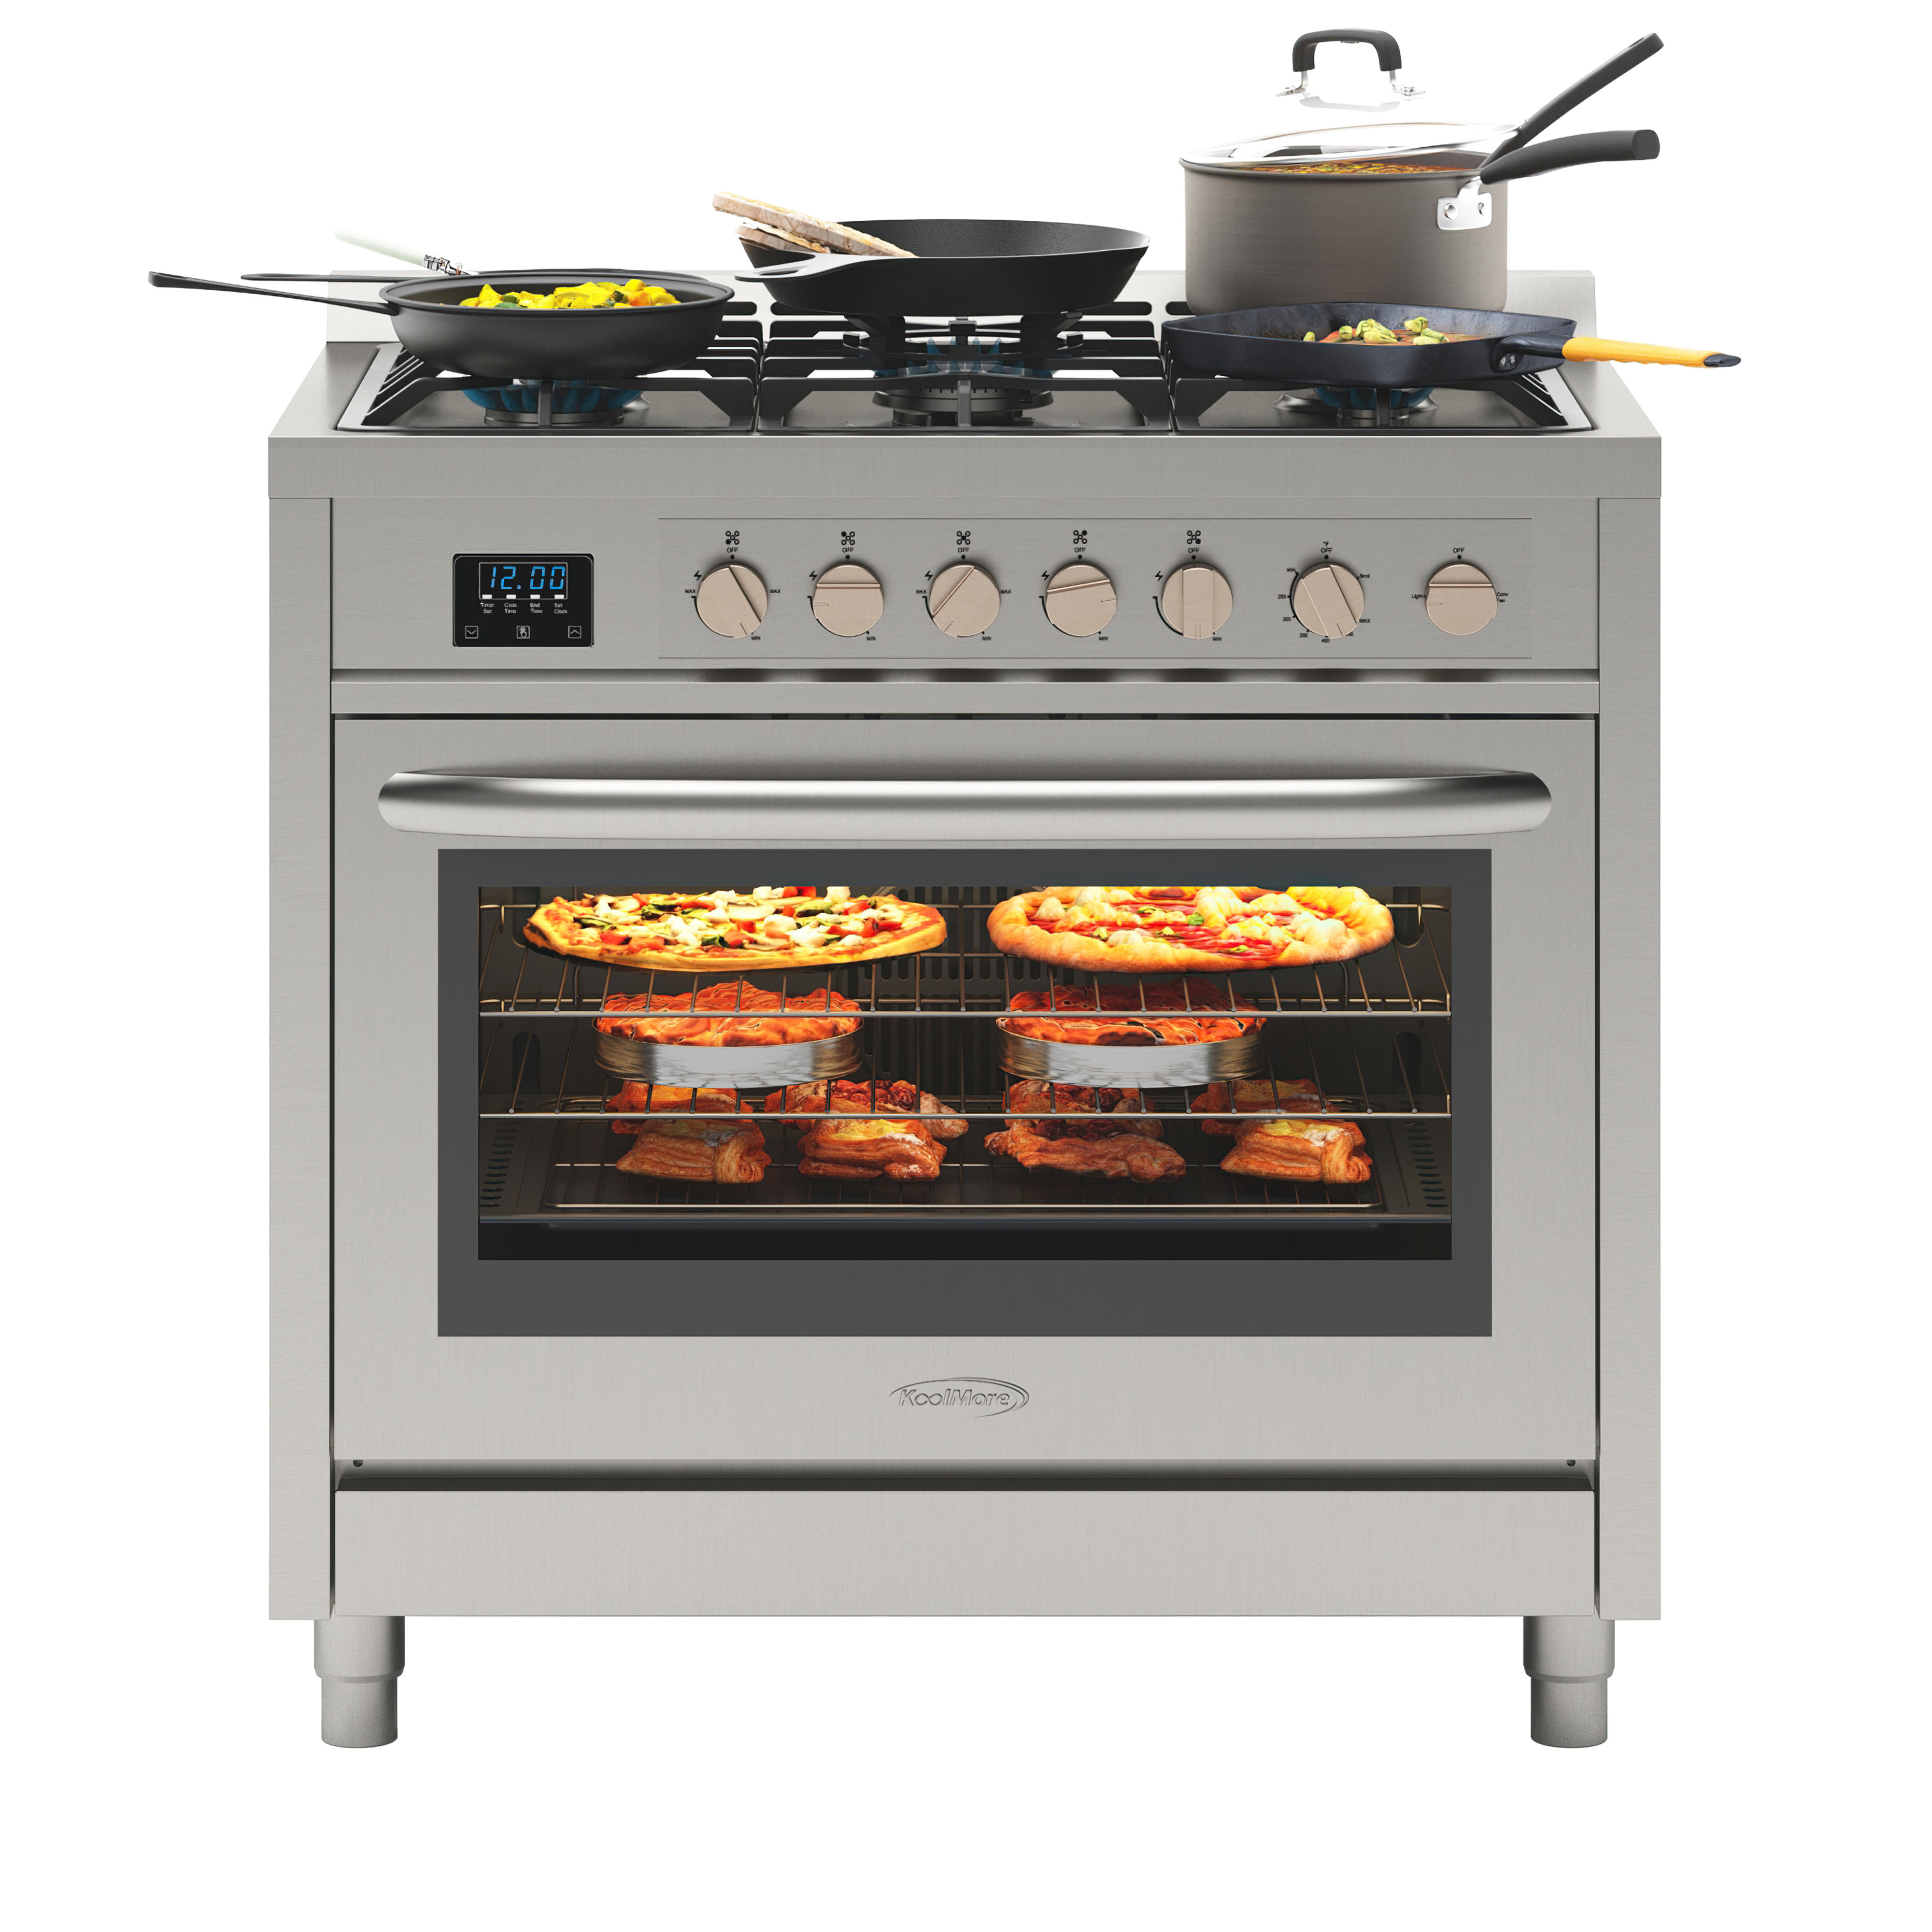 KoolMore 36 Inch All-Electric Range Oven with Ceramic Cooktop Burners,  Stainless Steel Kitchen Stove with Large Capacity Convection Cooking, 4.3  cu.